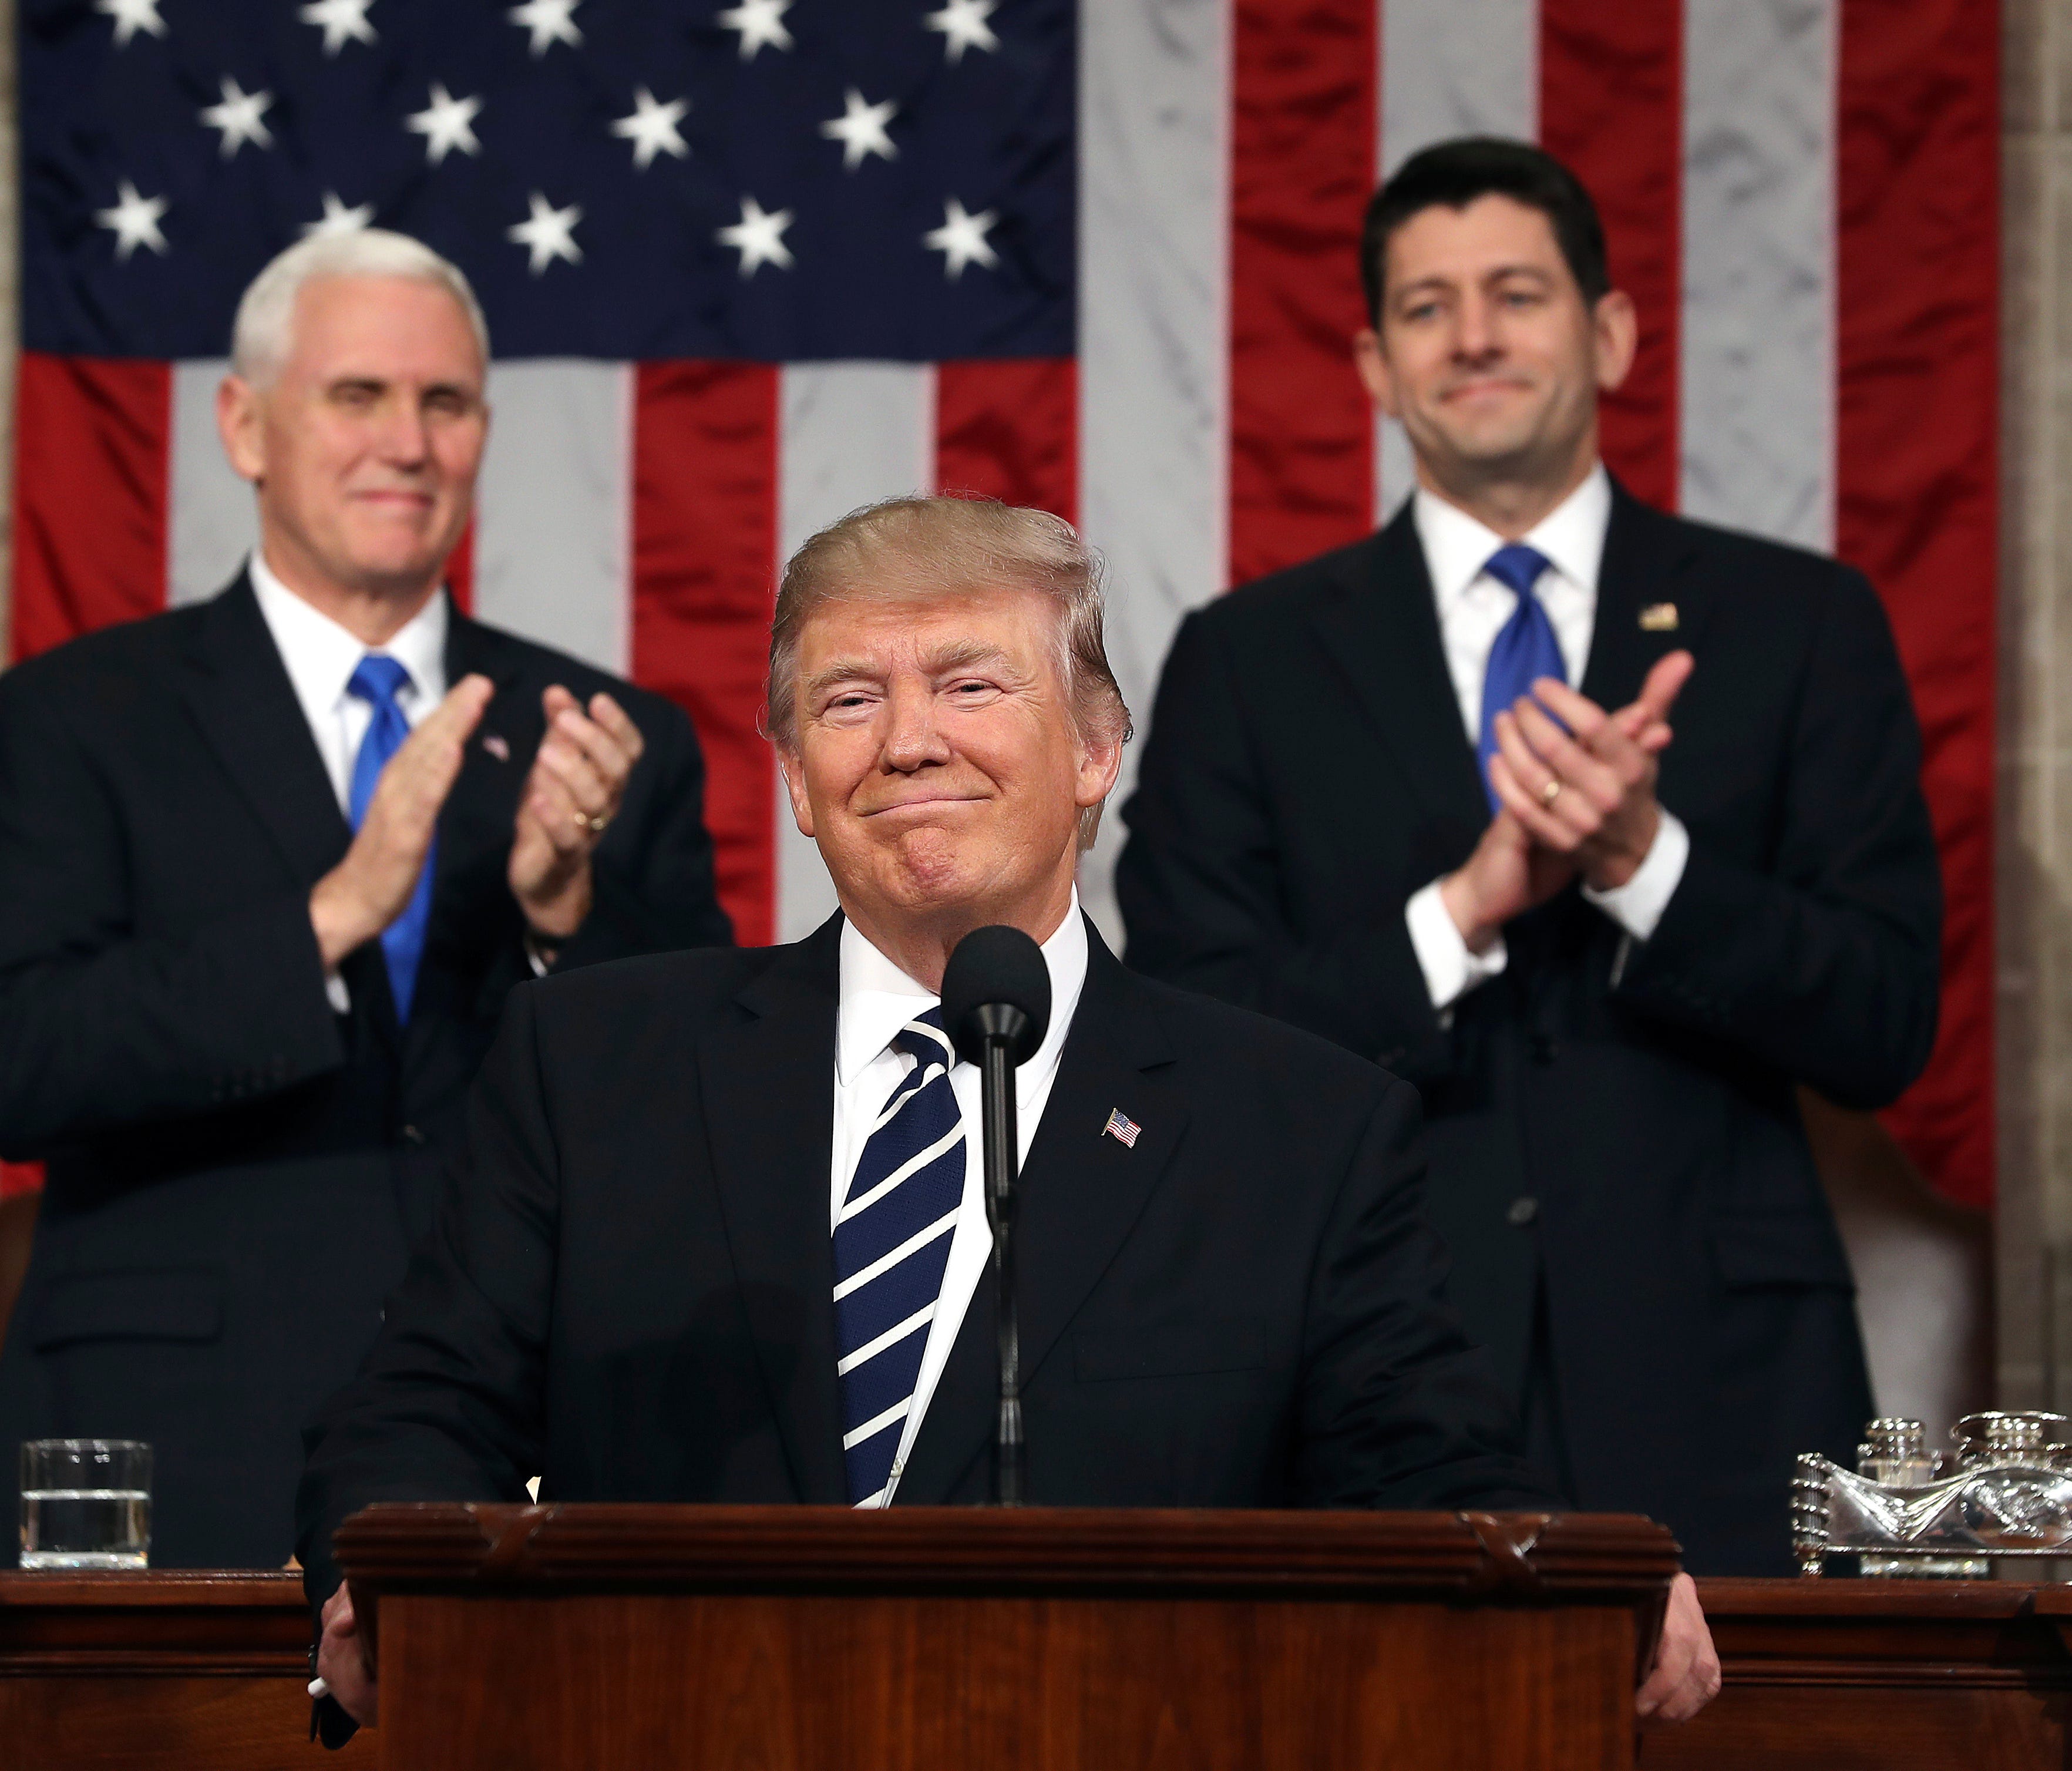 President Trump, flanked by Vice President Mike Pence and House Speaker Paul Ryan, delivered an address to a joint session of Congress on Feb. 28, 2017.